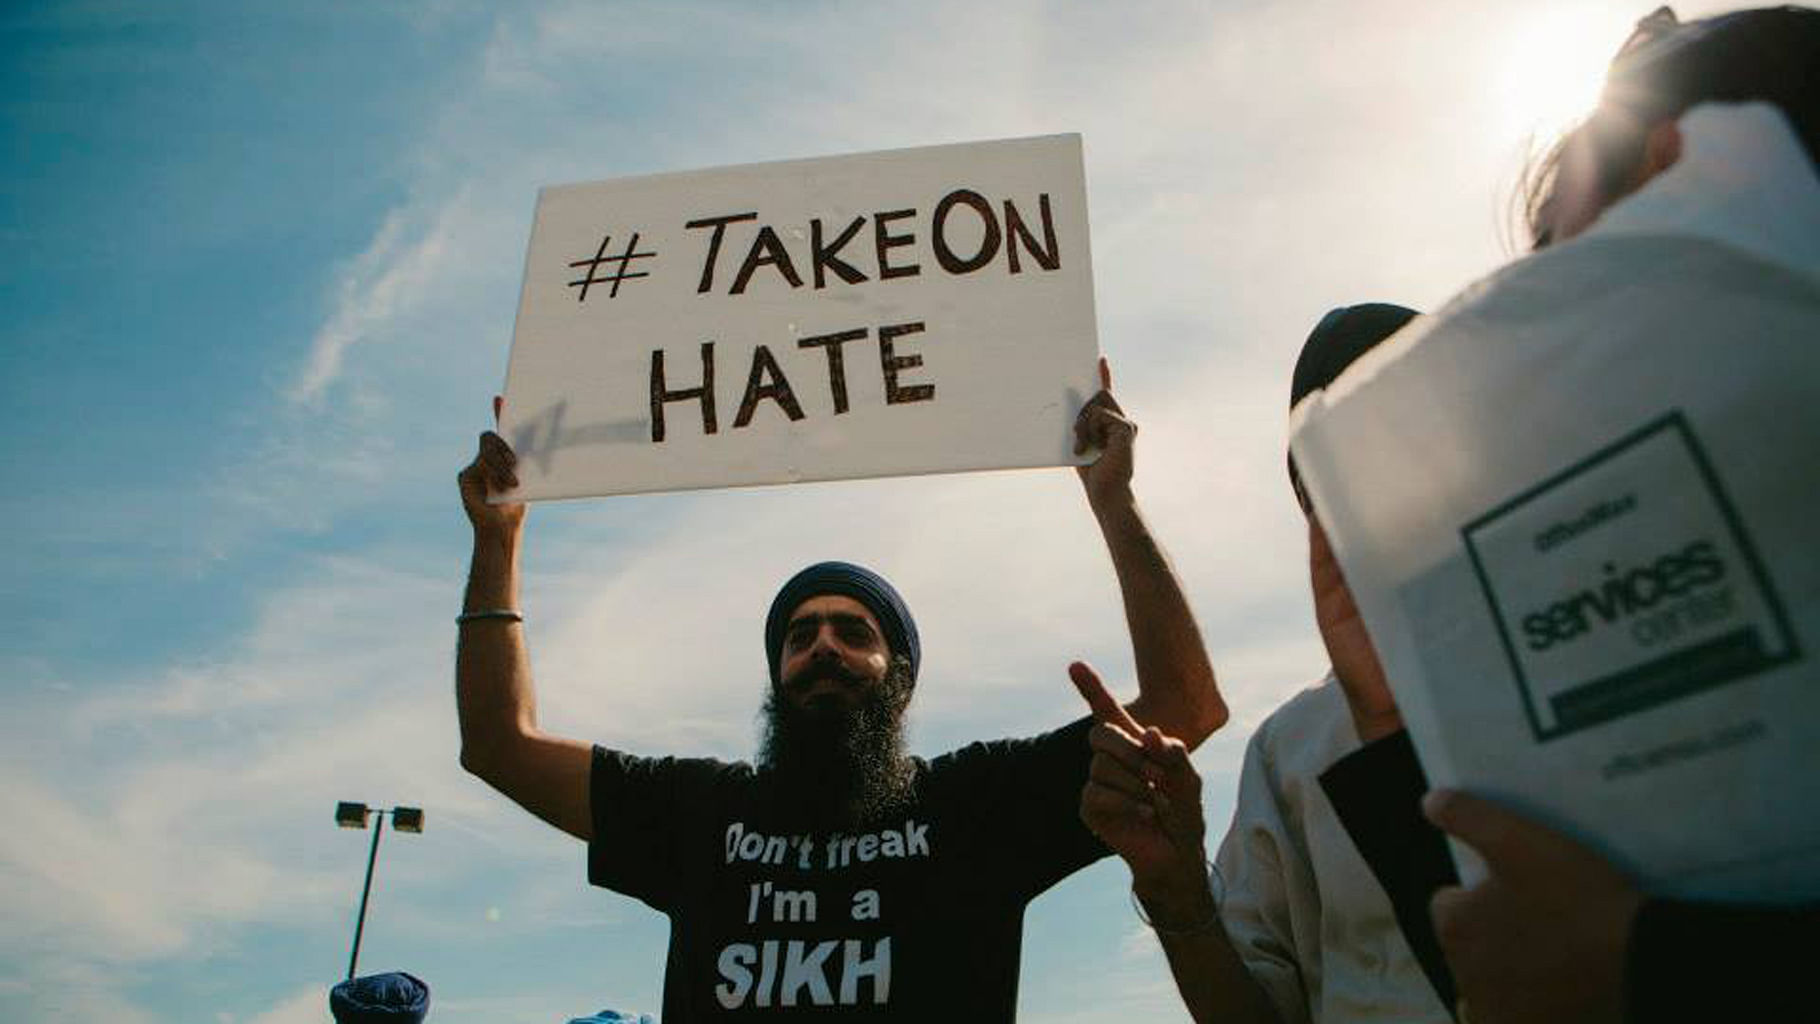 The Sikh man said the suspect made statements to the effect of “go back to your own country.” (Photo Courtesy: Sikh Coalition’s <a href="https://www.facebook.com/thesikhcoalition">Facebook Page</a>)